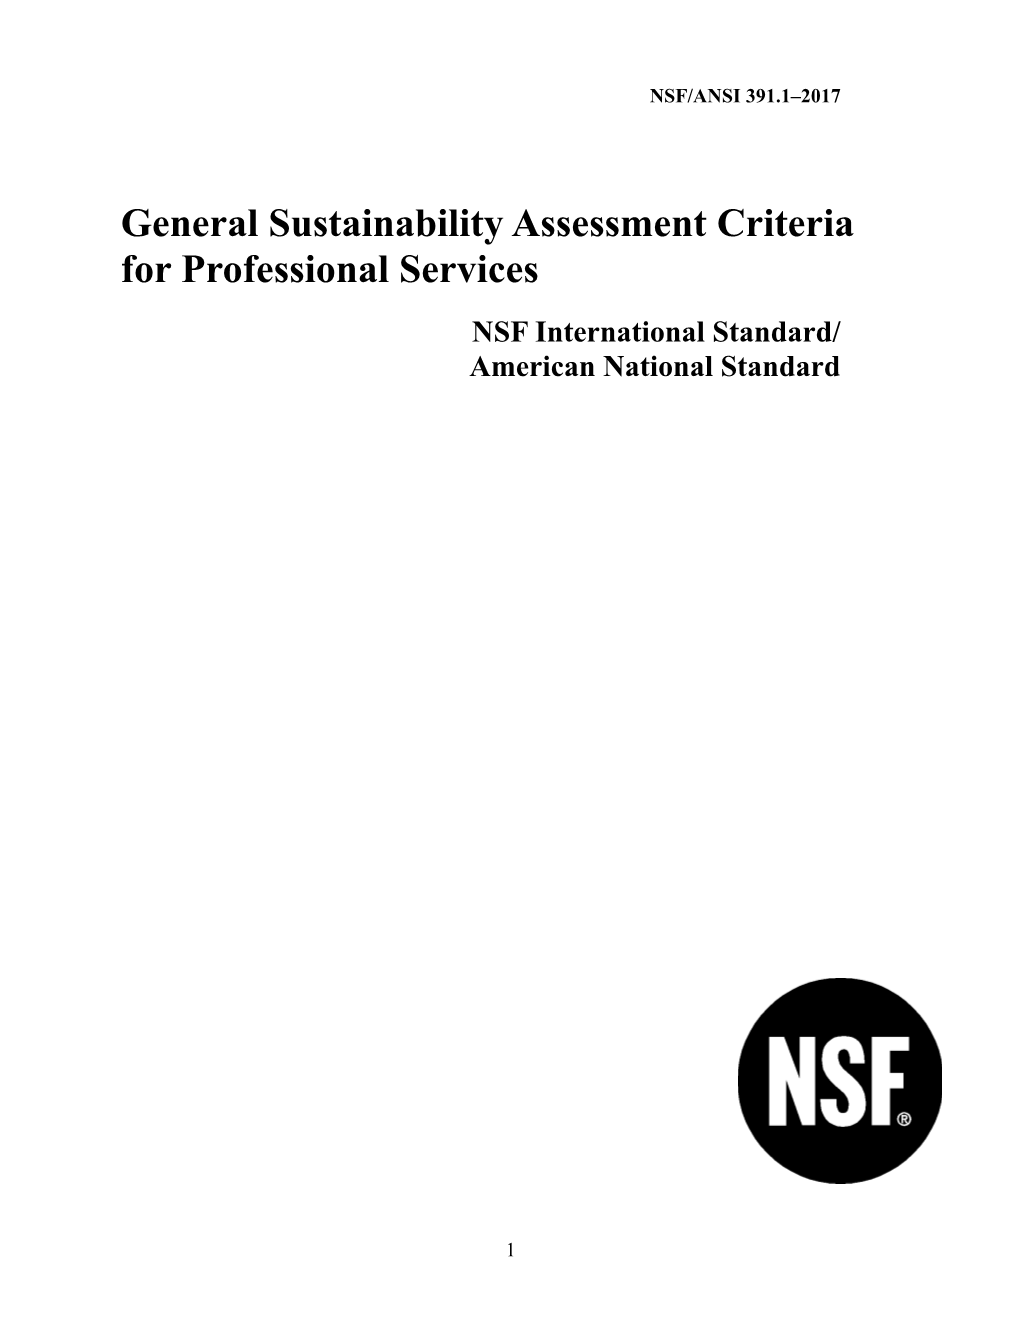 General Sustainability Assessment Criteria for Professional Services